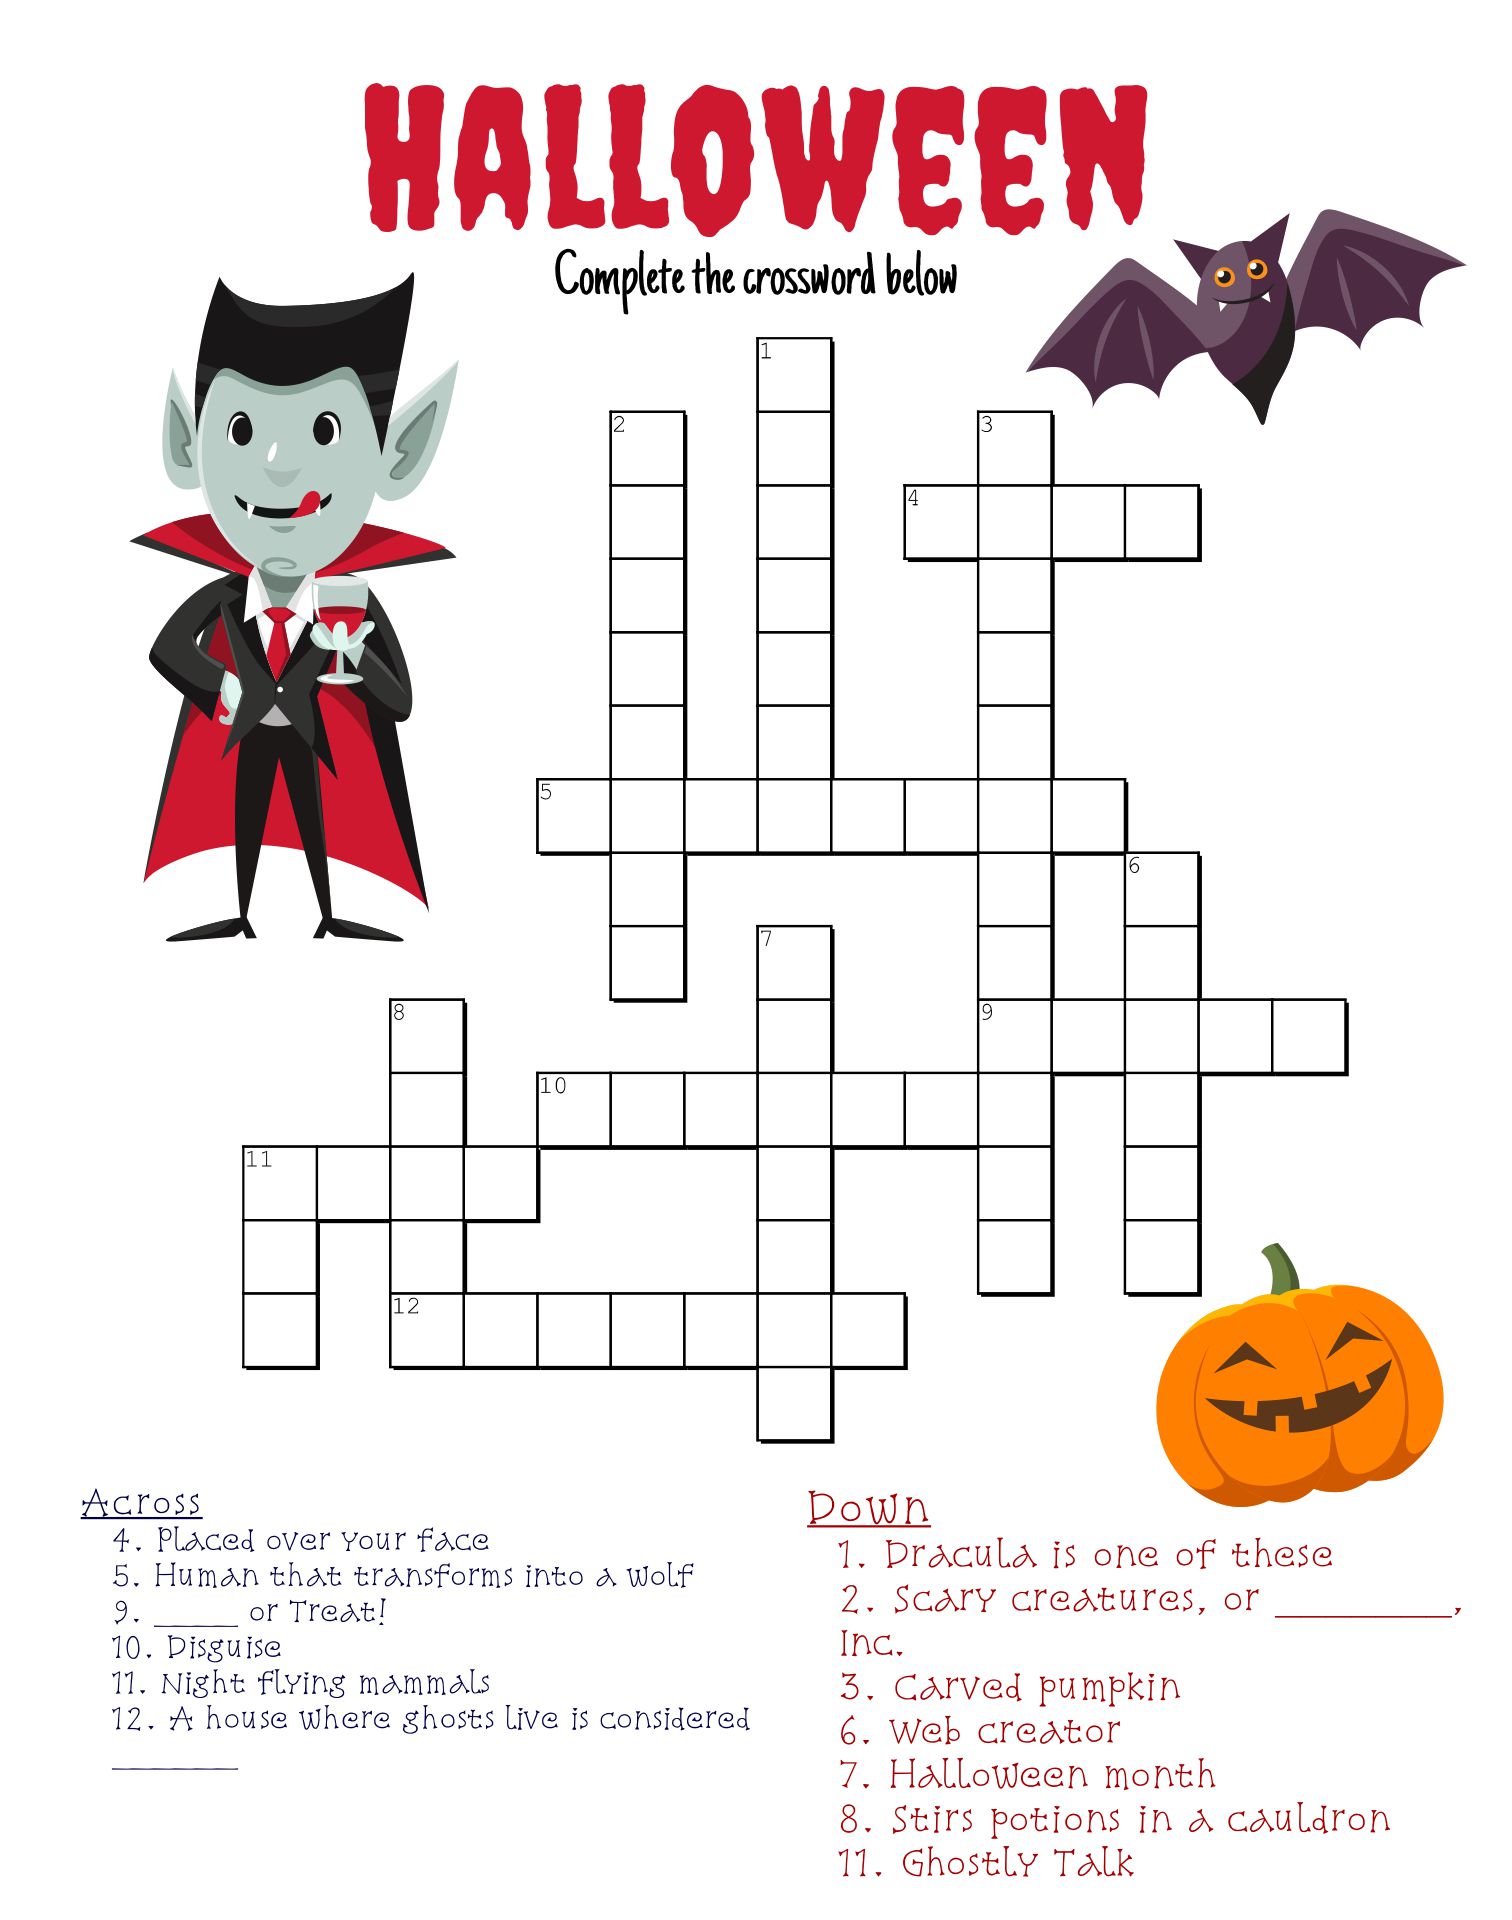 Halloween Printable Crossword Puzzles Here Are A Few Cute And Fun